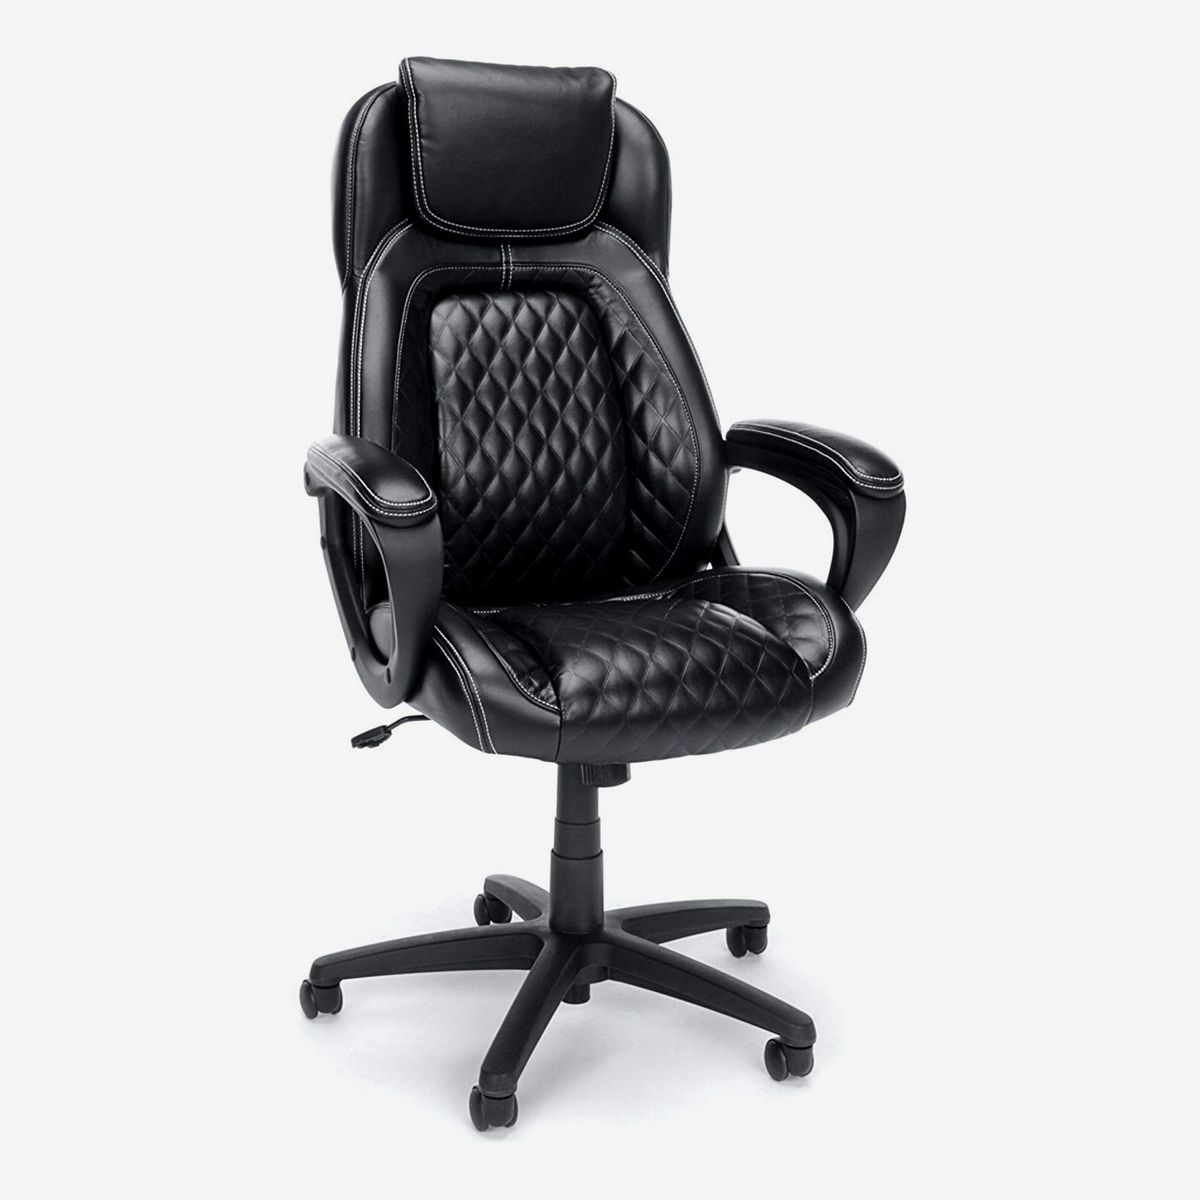 14 Best Office Chairs And Home, Best Executive Desk Chair 2021